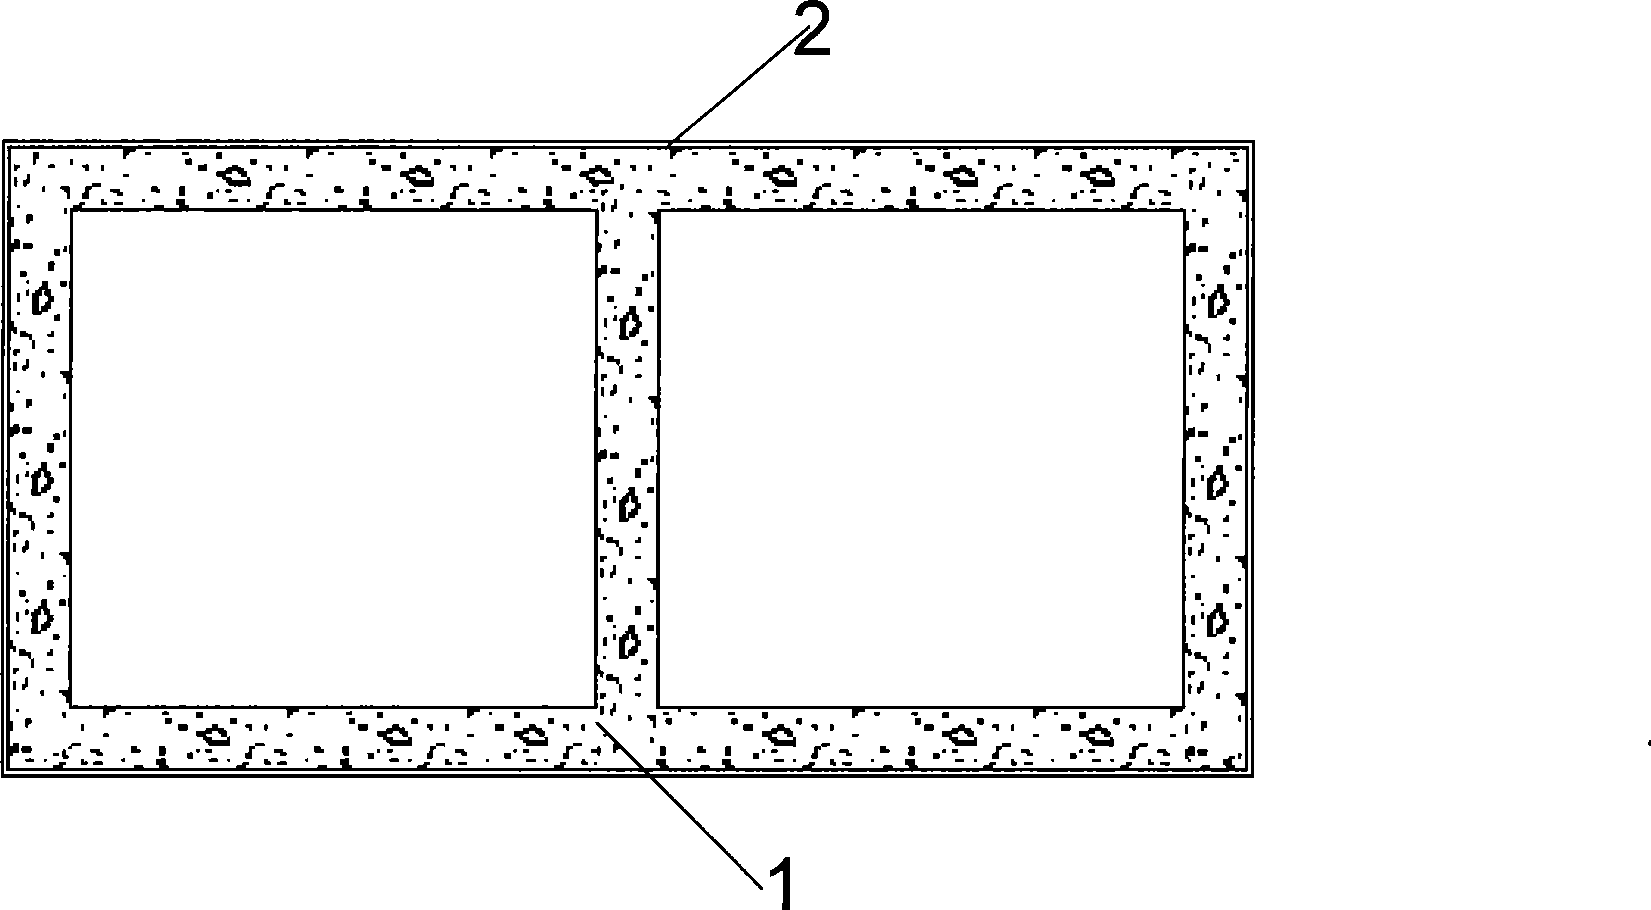 Wall and its construction method